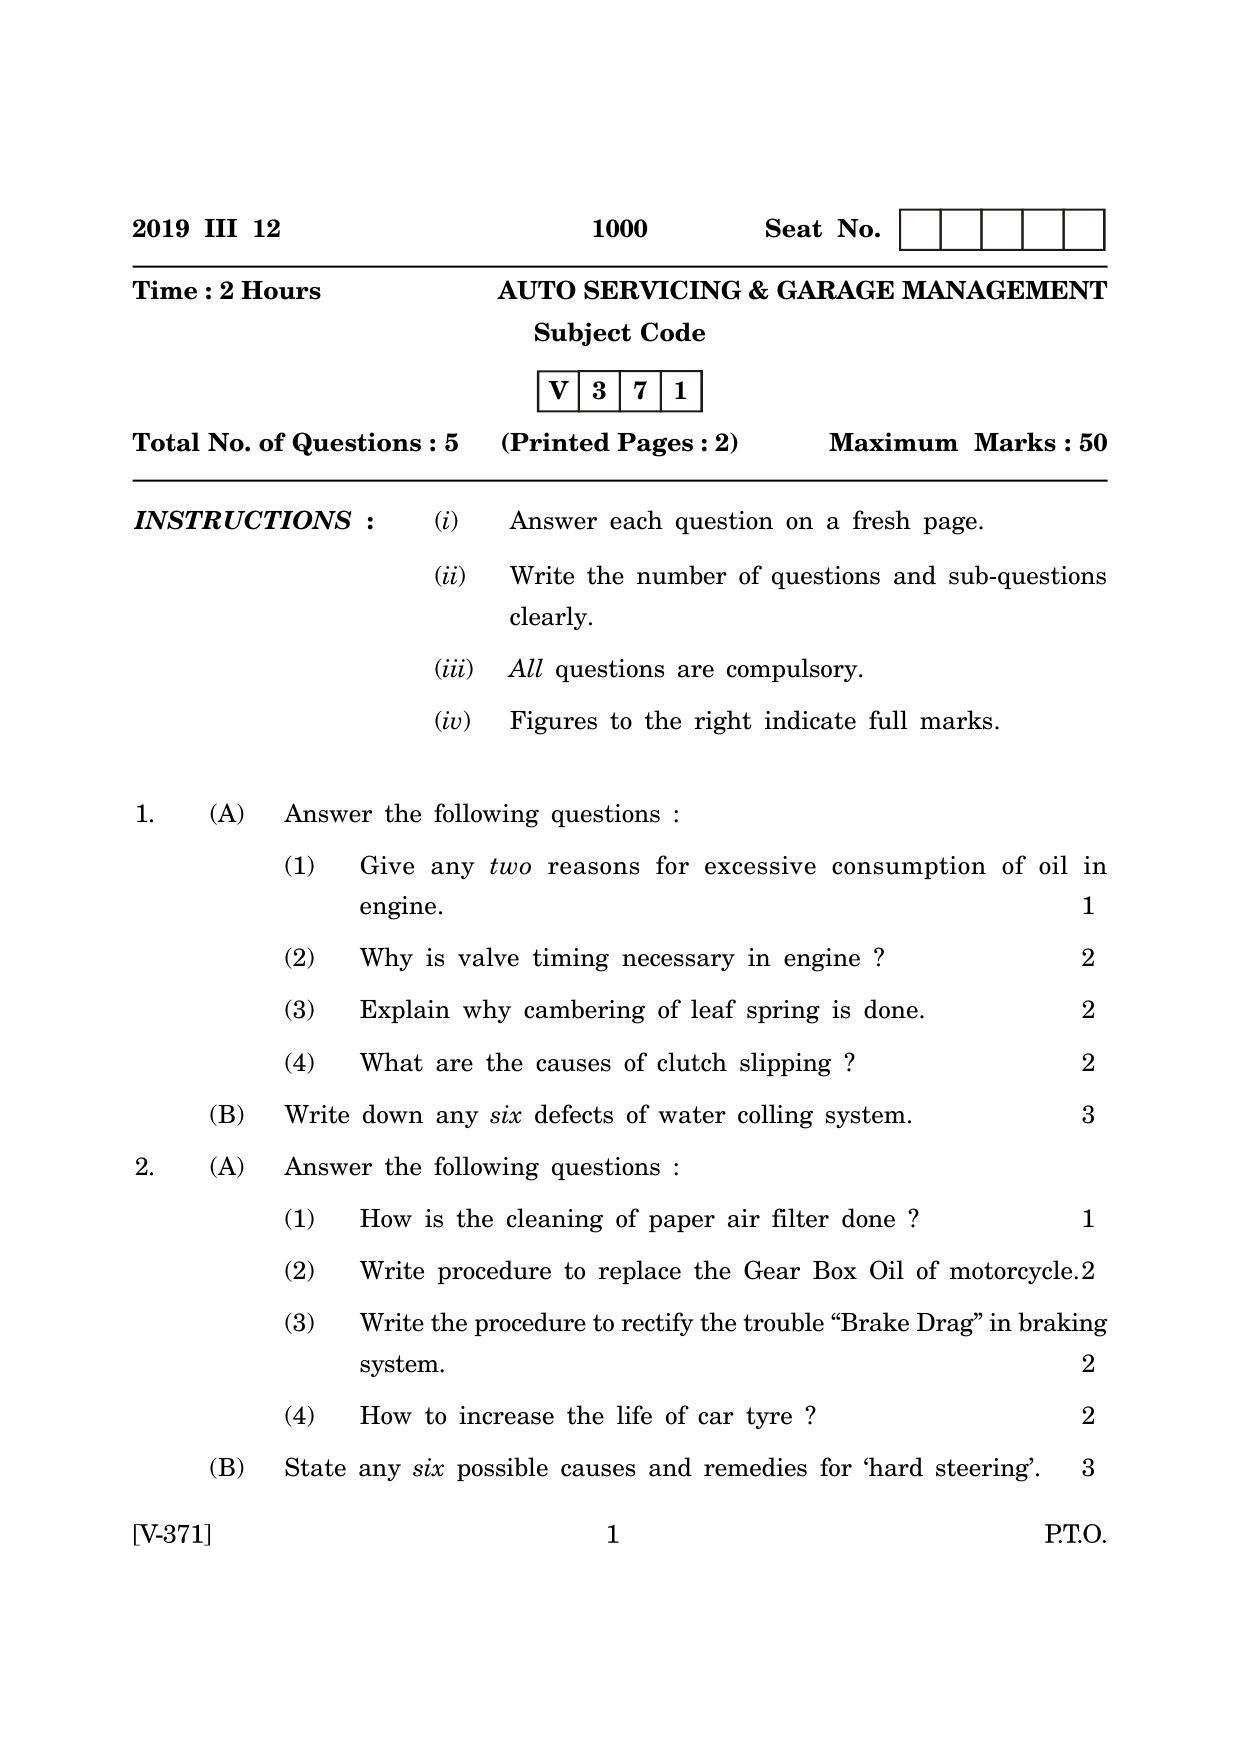 Goa Board Class 12 Auto Servicing & Garage Management  March 2019 (March 2019) Question Paper - Page 1